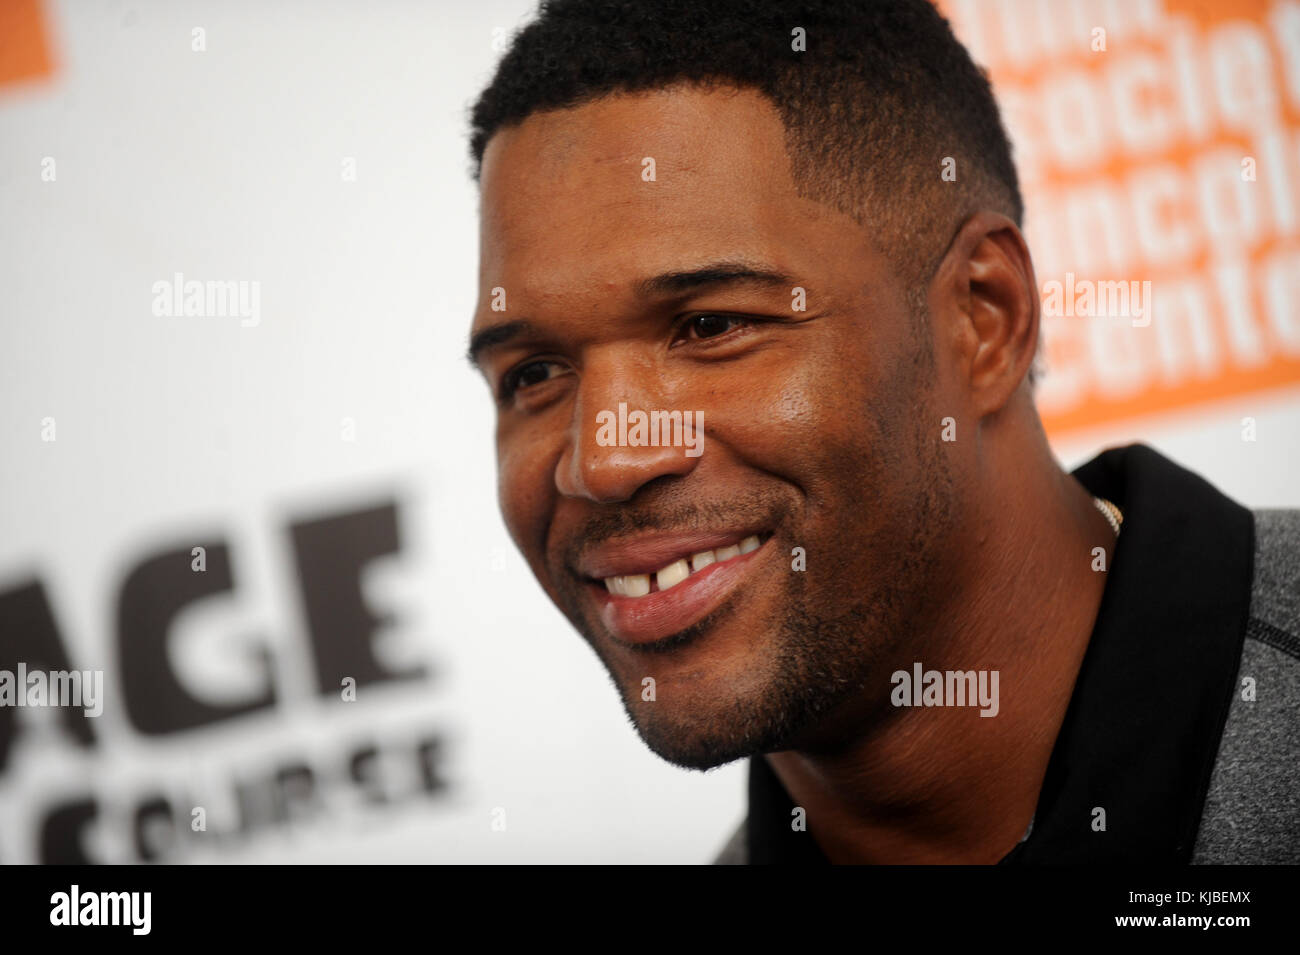 NEW YORK, NY - JULY 07:  Michael Strahan attends the 'Ice Age: Collision Course' New York screening at Walter Reade Theater on July 7, 2016 in New York City  People:  Michael Strahan Stock Photo